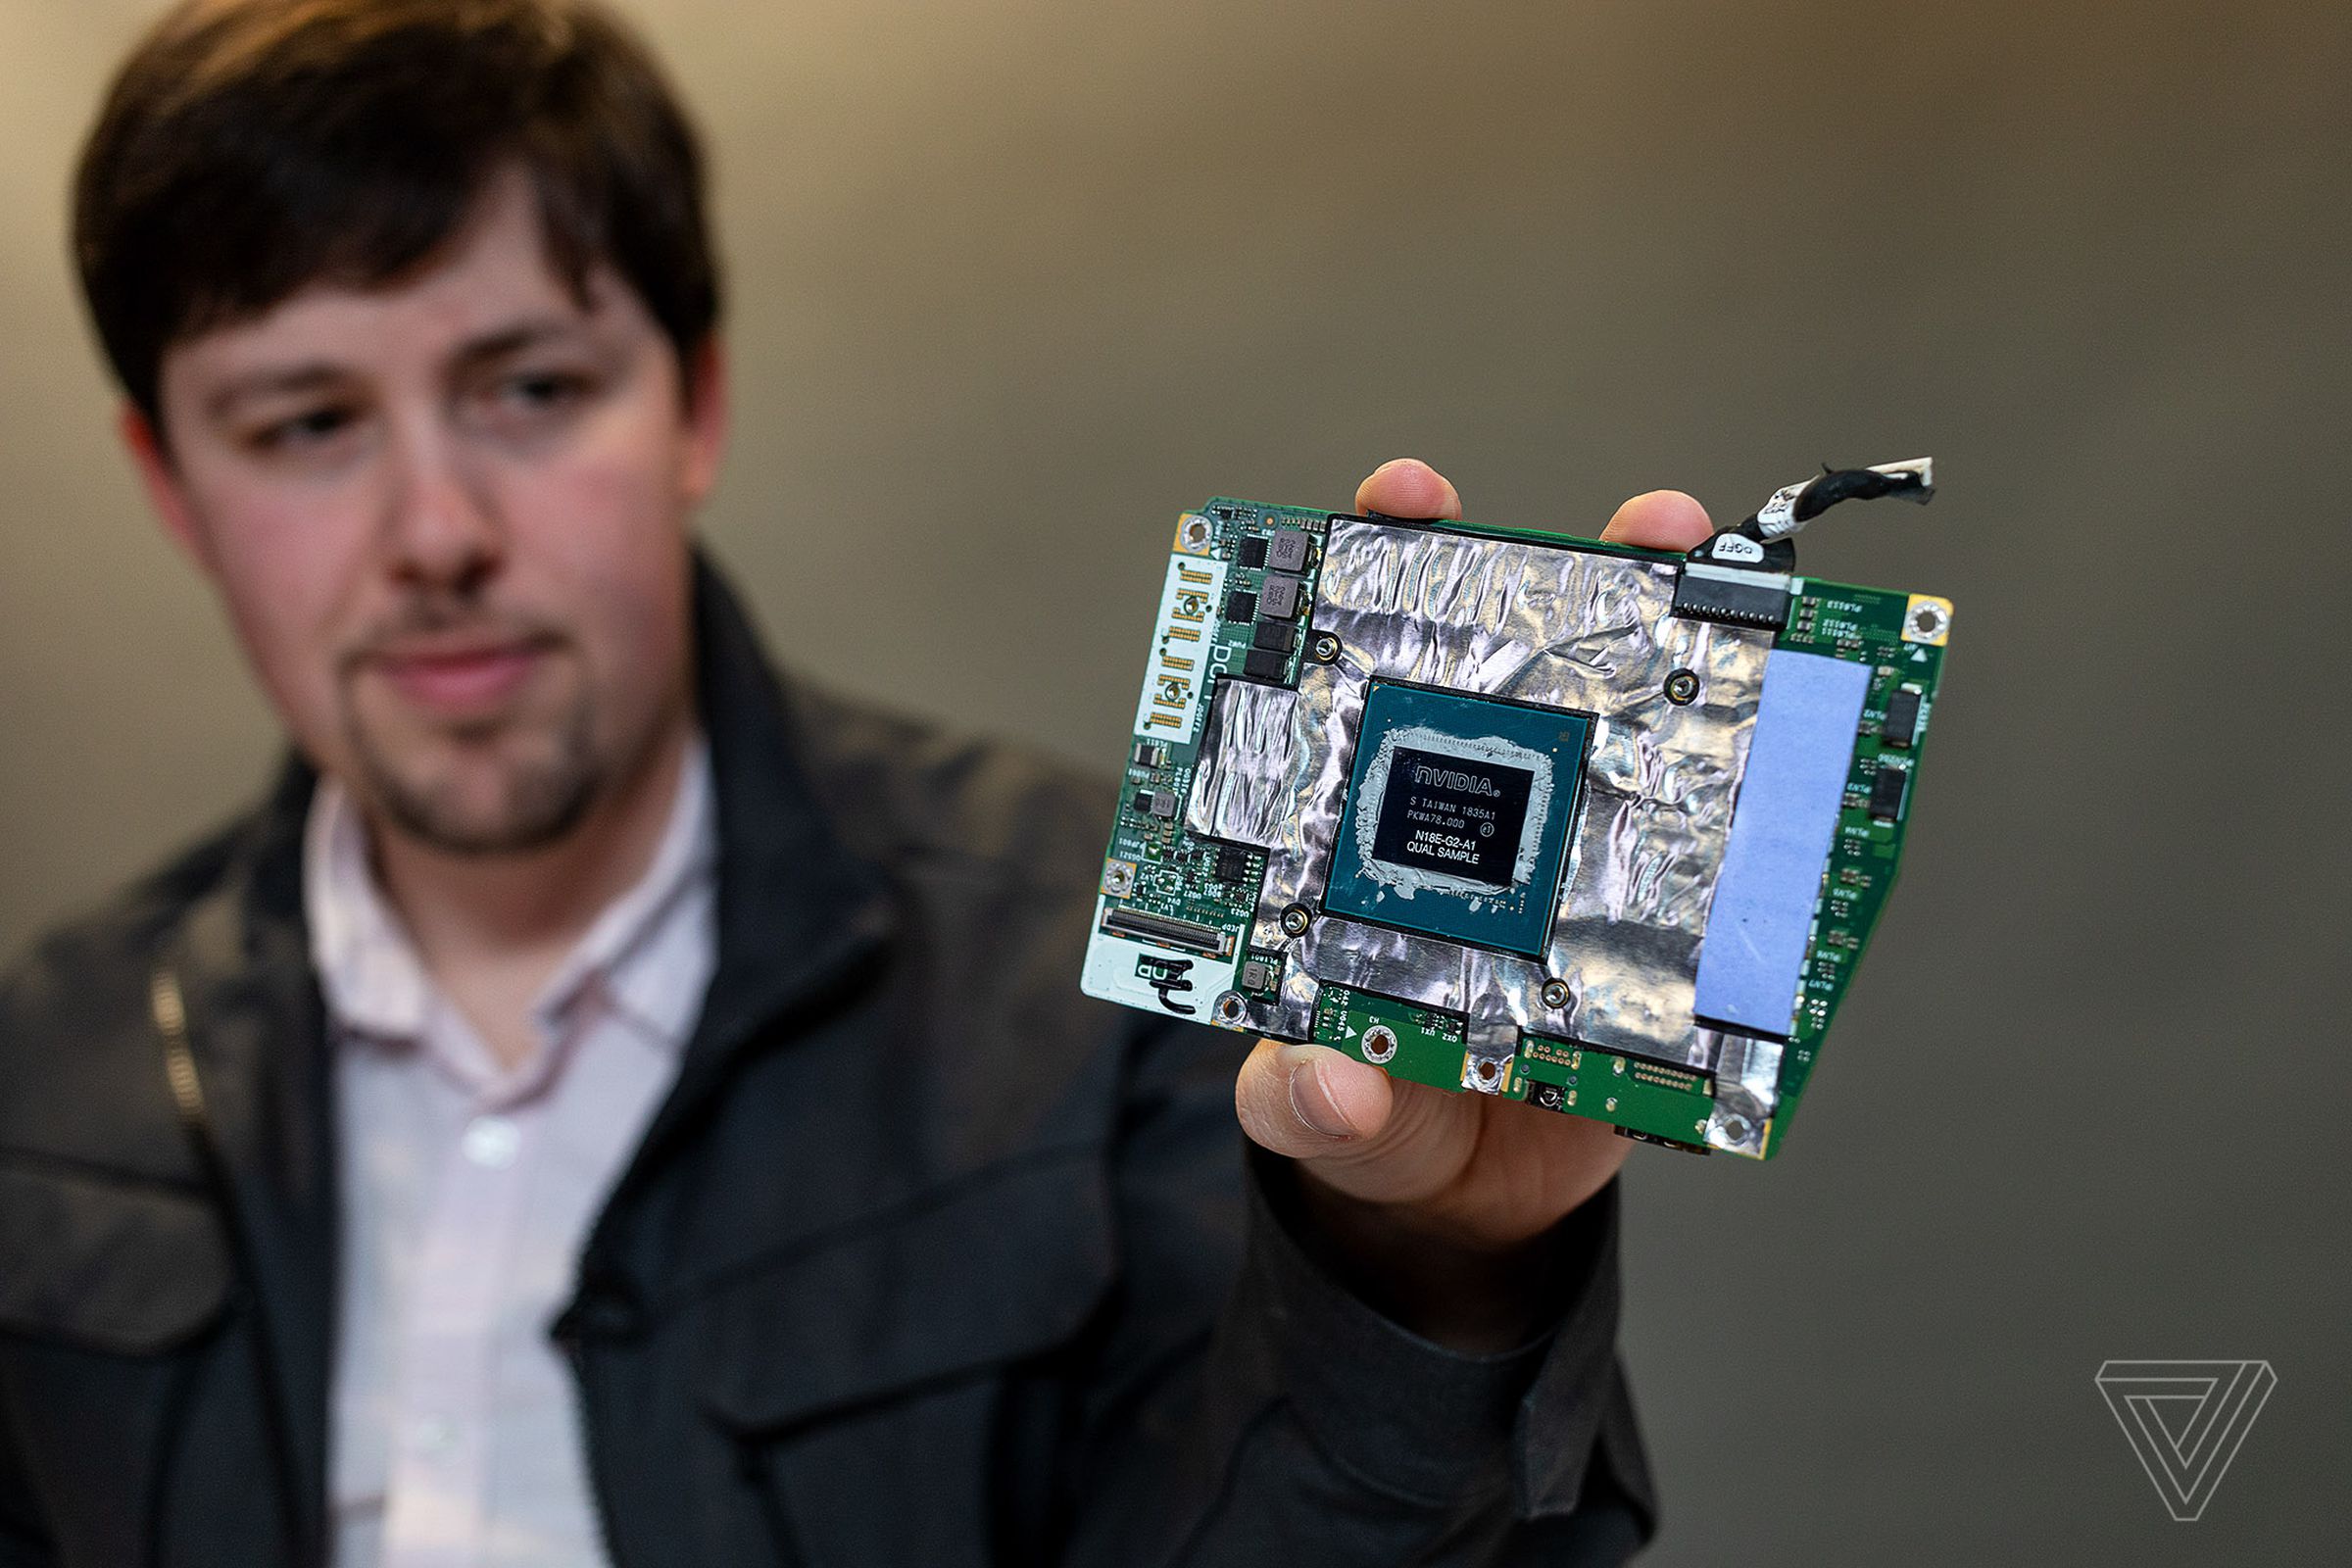 Record scratch, freeze frame, yep that’s me holding up Dell’s swappable GPU board in 2019... 